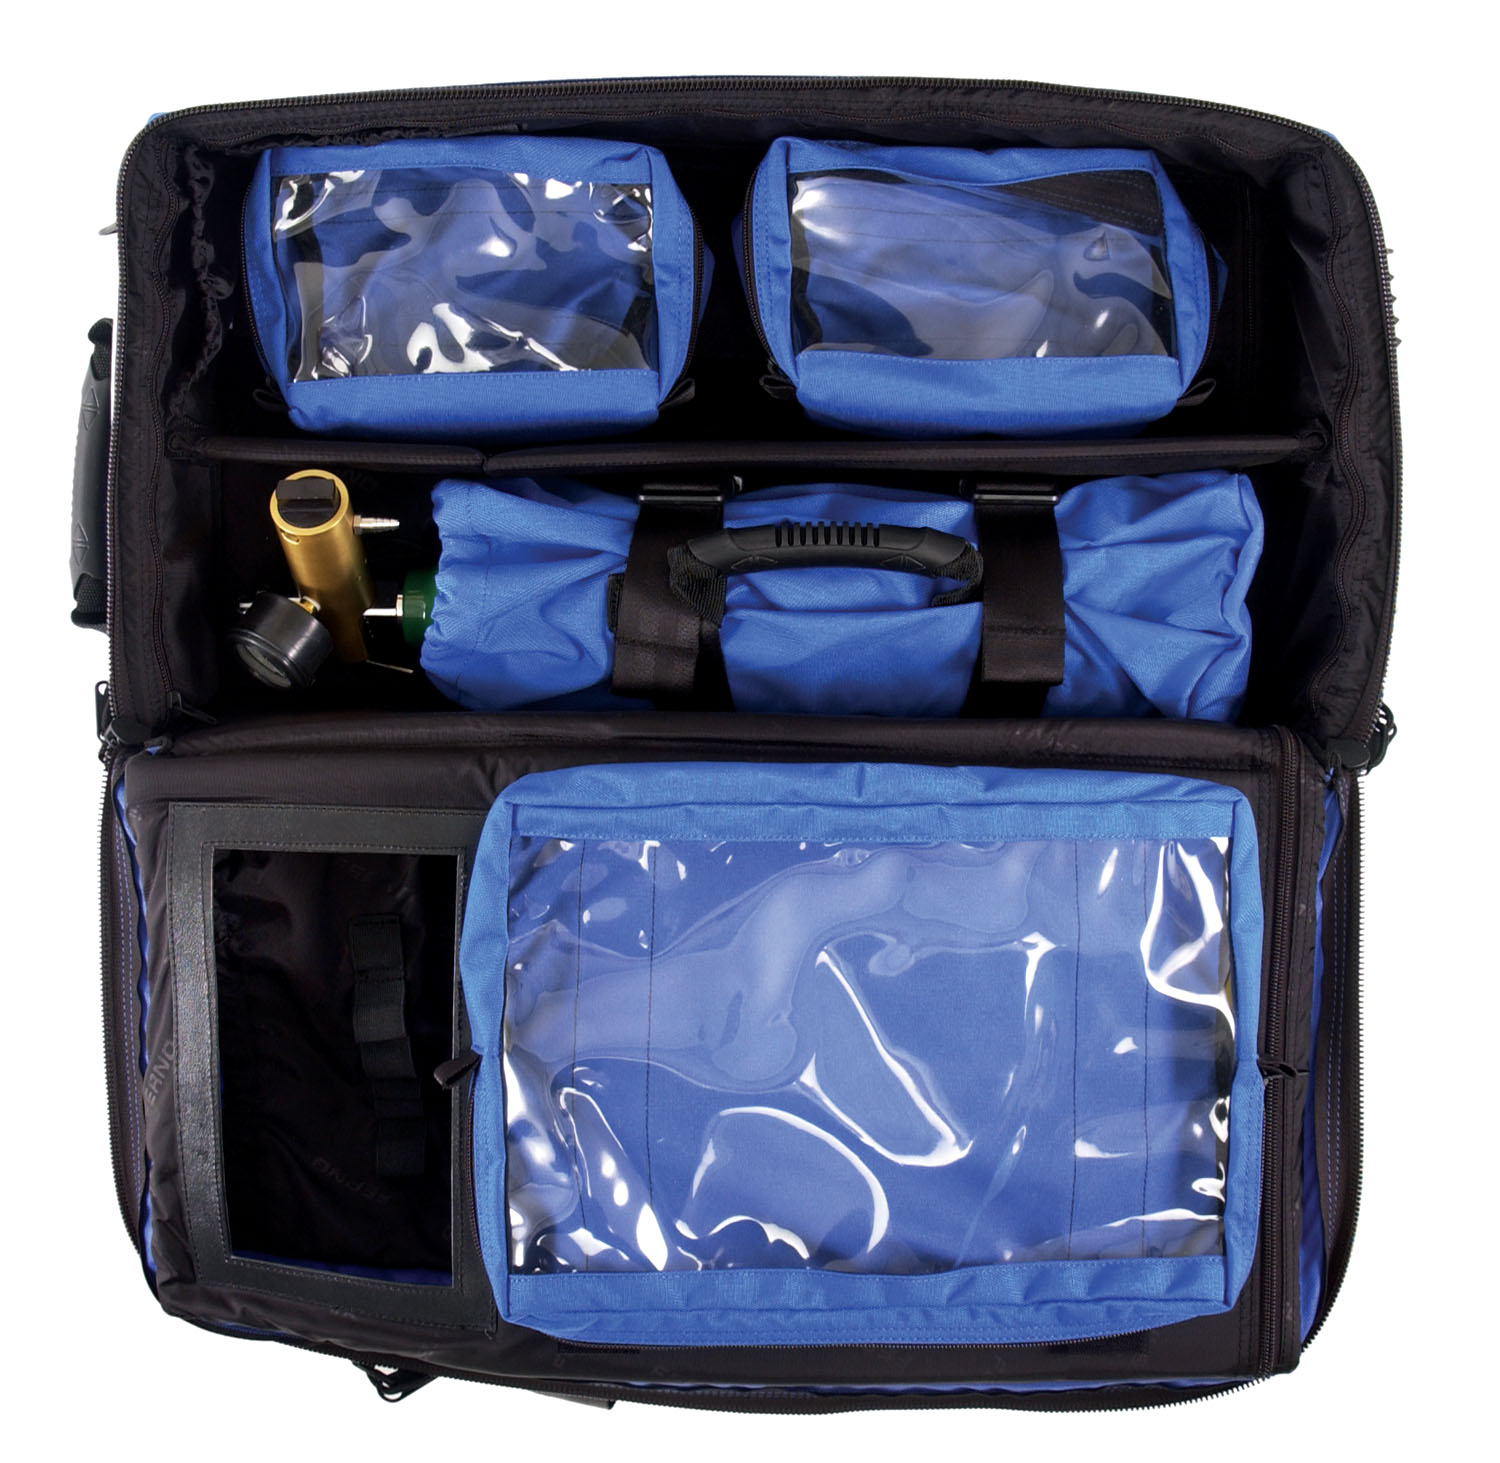 Airway Management Oxygen Bag FOR SALE - FREE Shipping